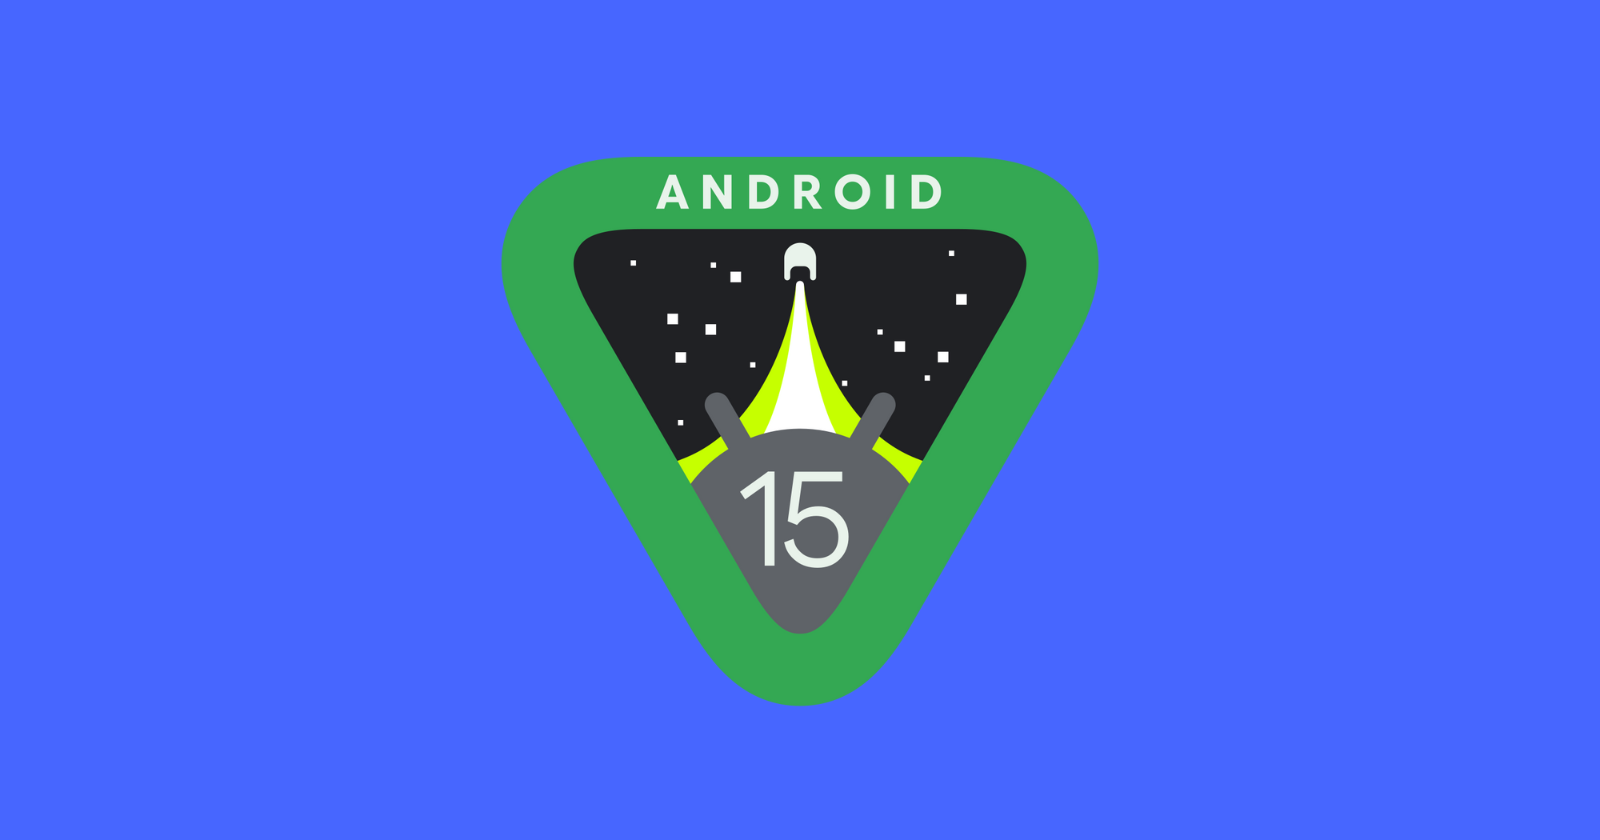 Android 15 - اندرويد 15